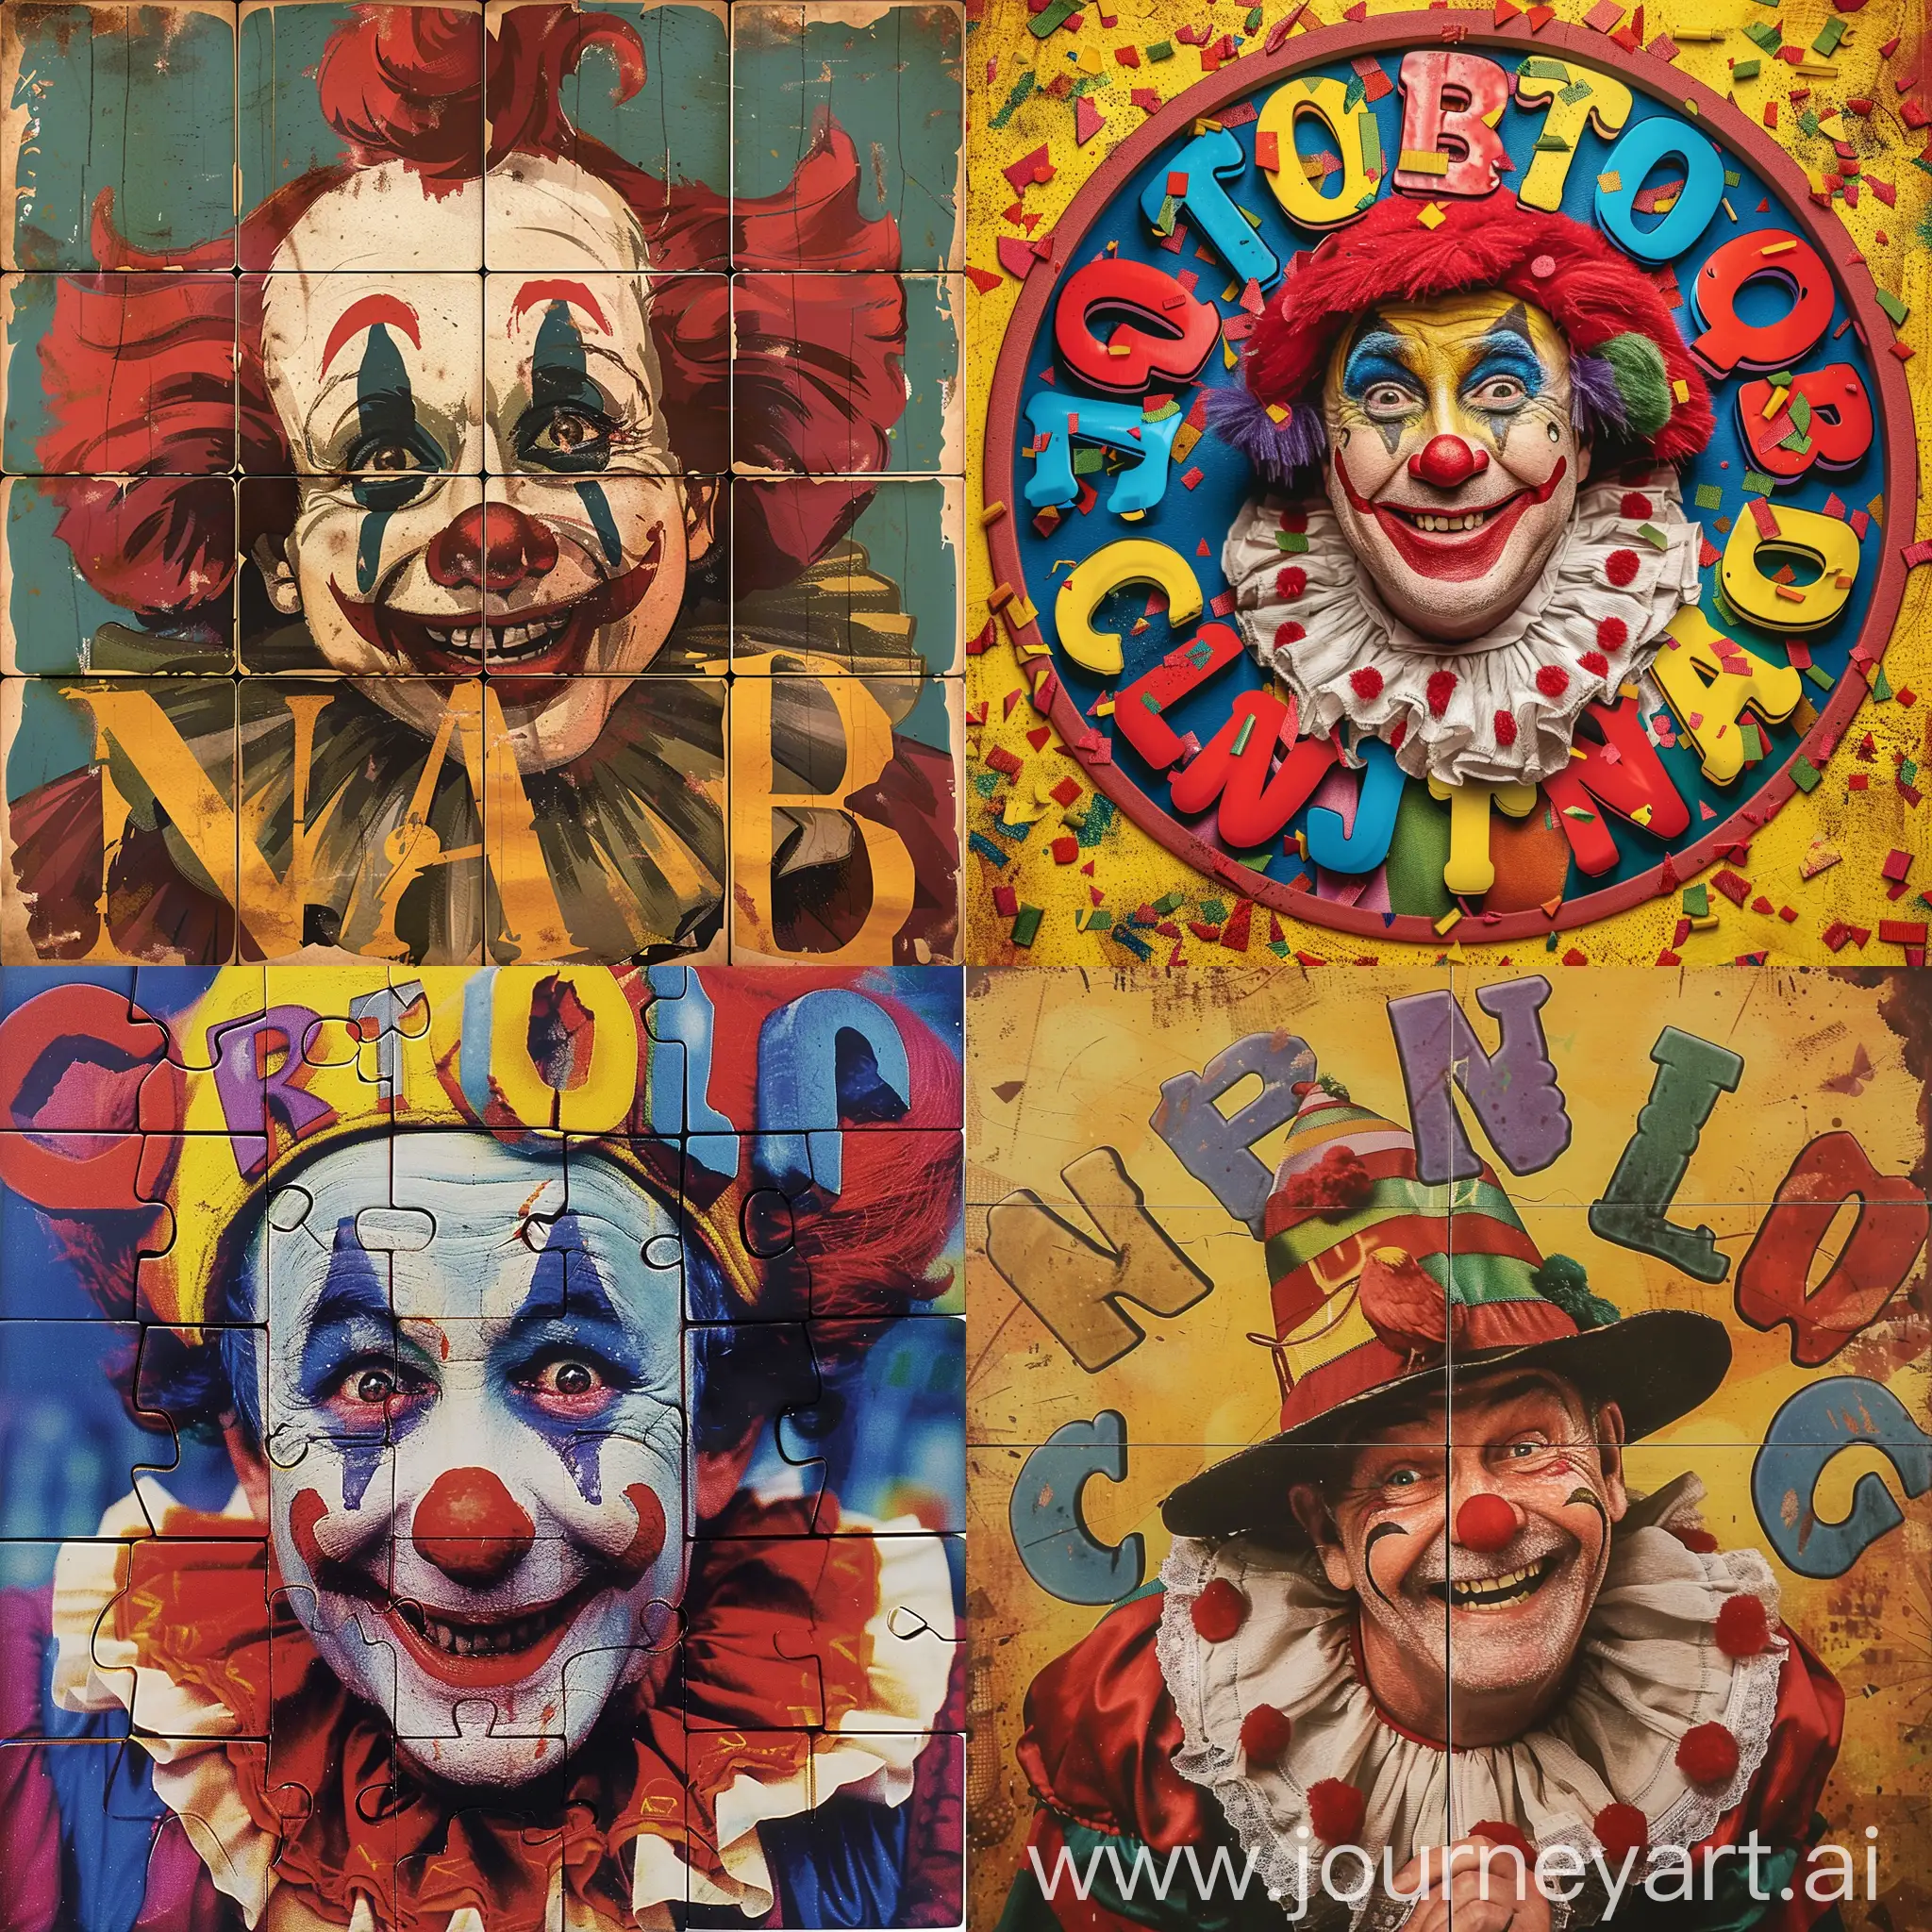 Circus-Clown-Alphabet-Wall-Art-for-Vibrant-Home-Decor-and-Birthday-Parties